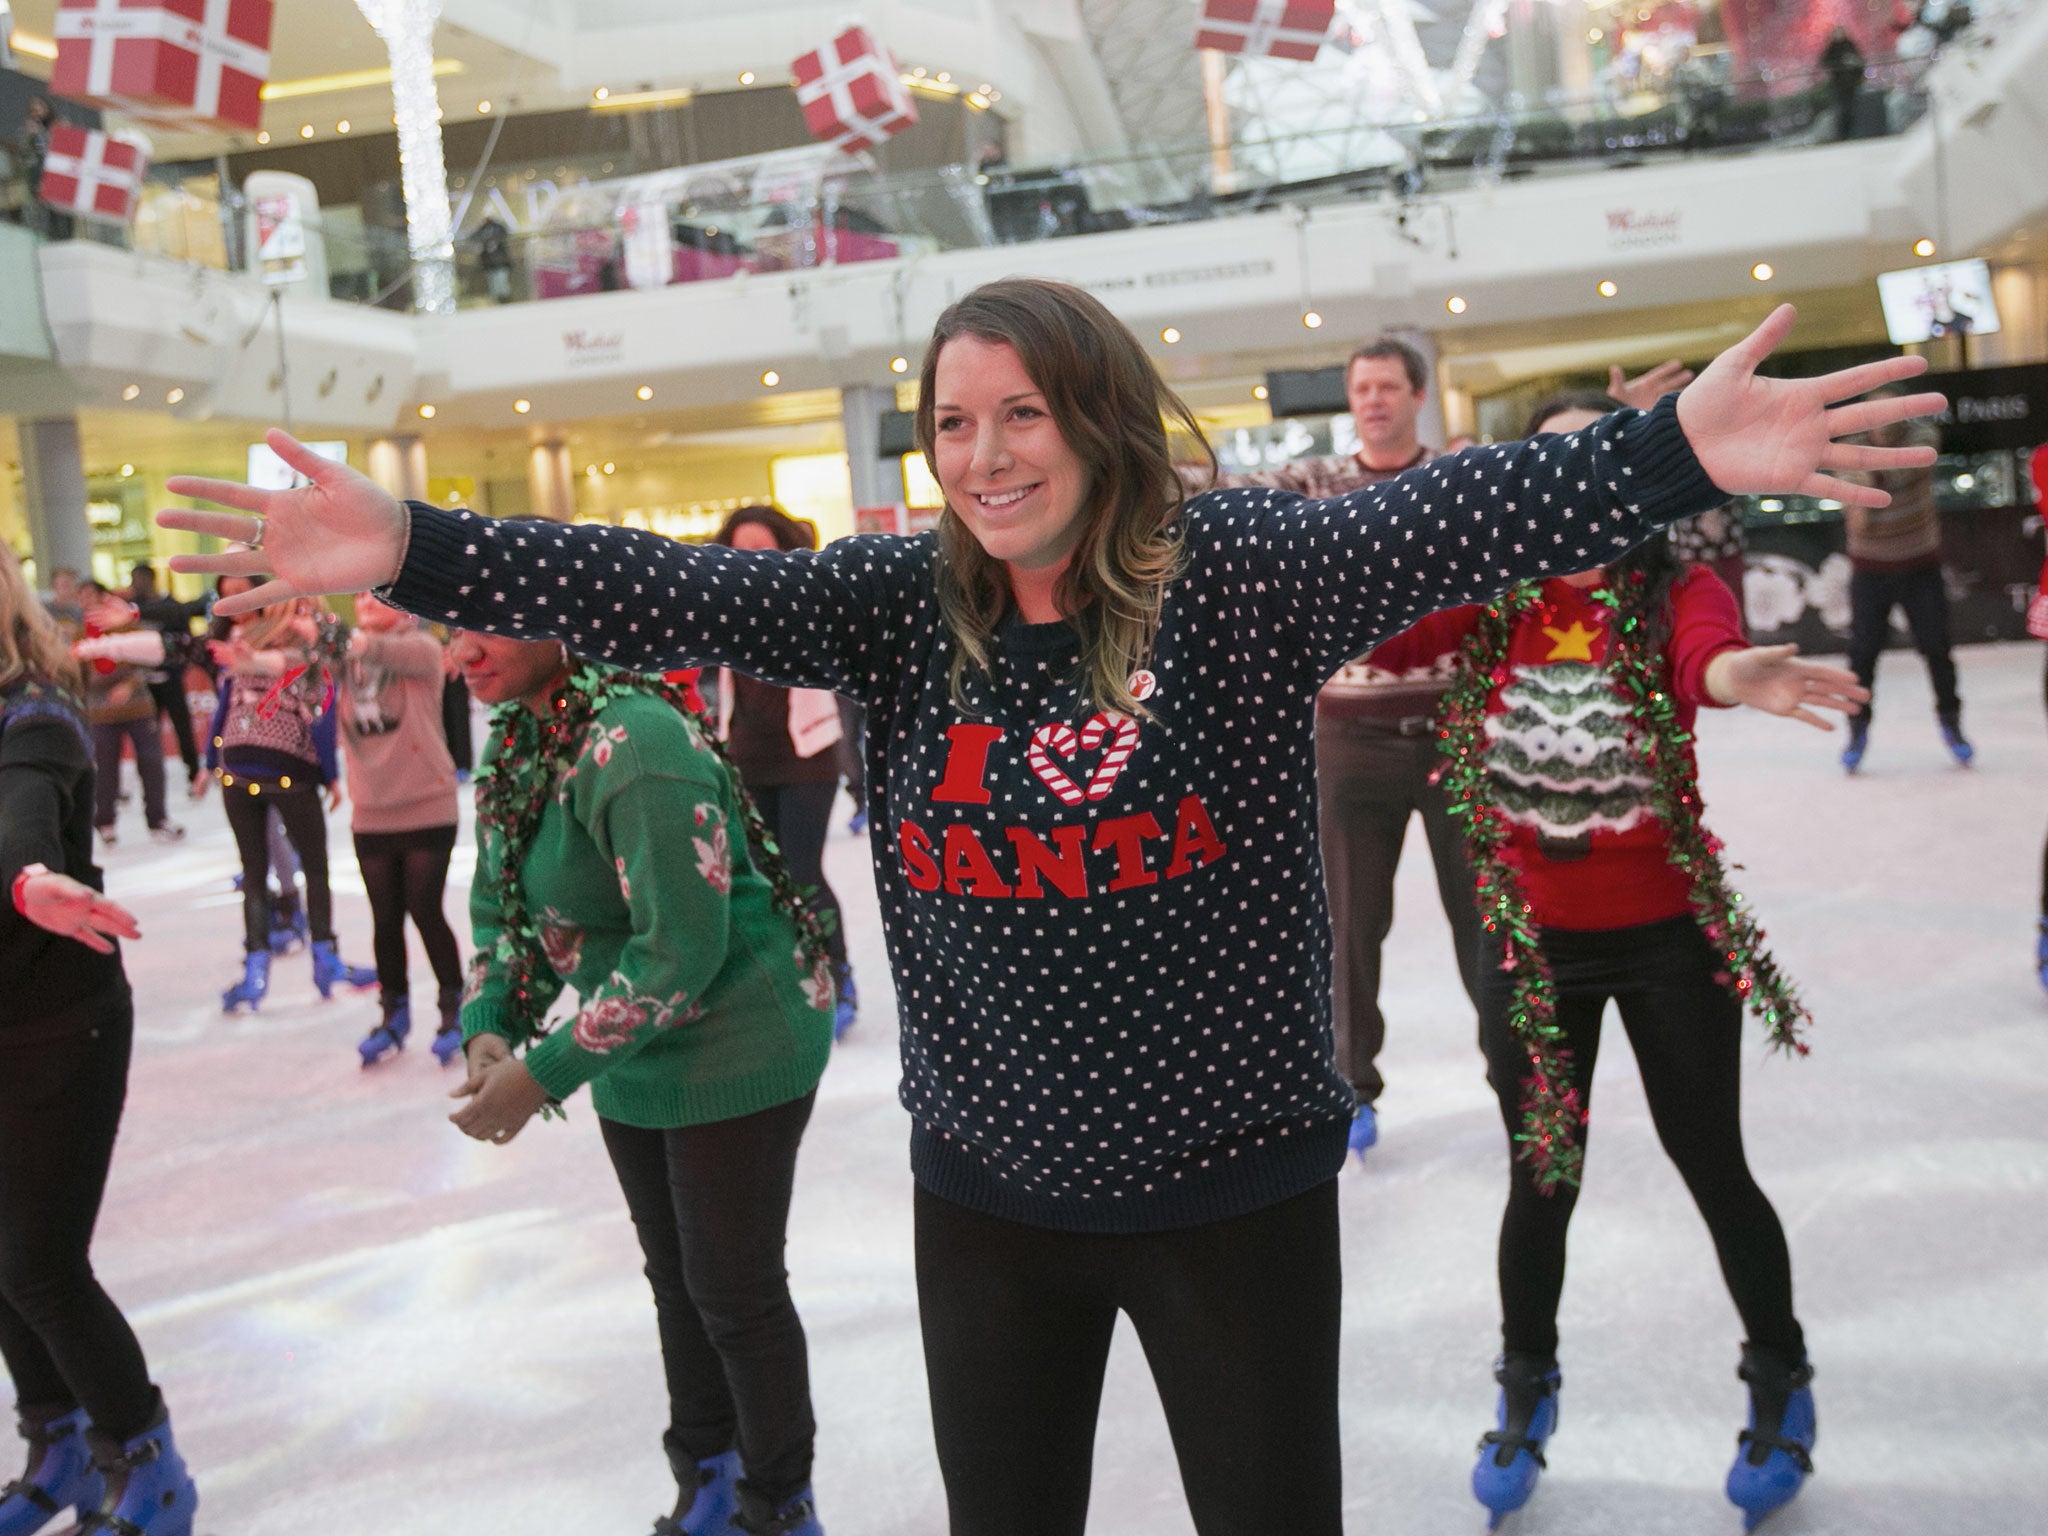 A woman takes part in an attempt to break the world record for the most people wearing Christmas jumpers on December 13, 2013 in London, England